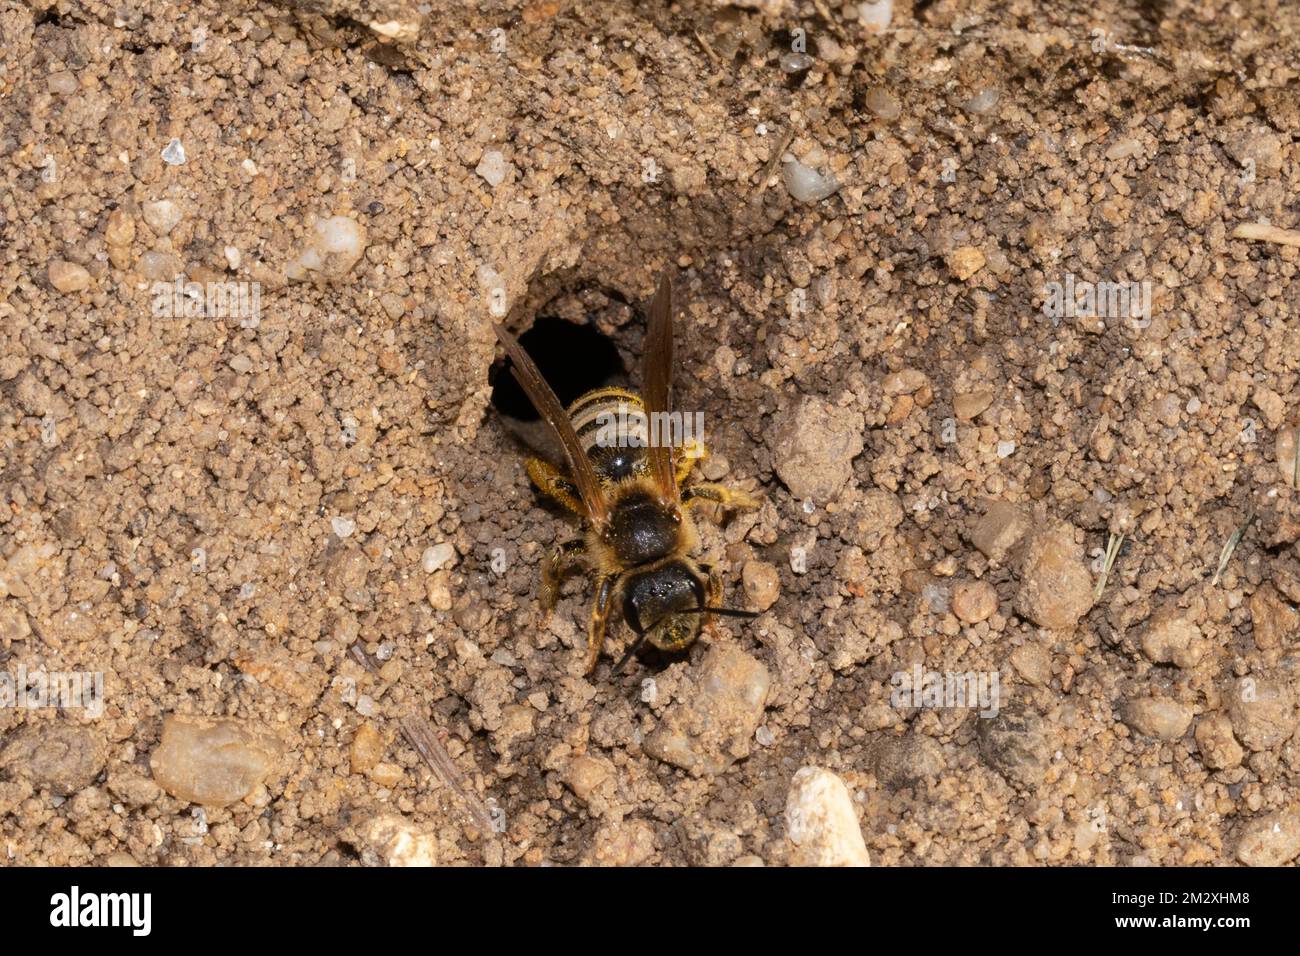 Yellow-banded furrowing bee crawling on ground from nest hole from the front Stock Photo